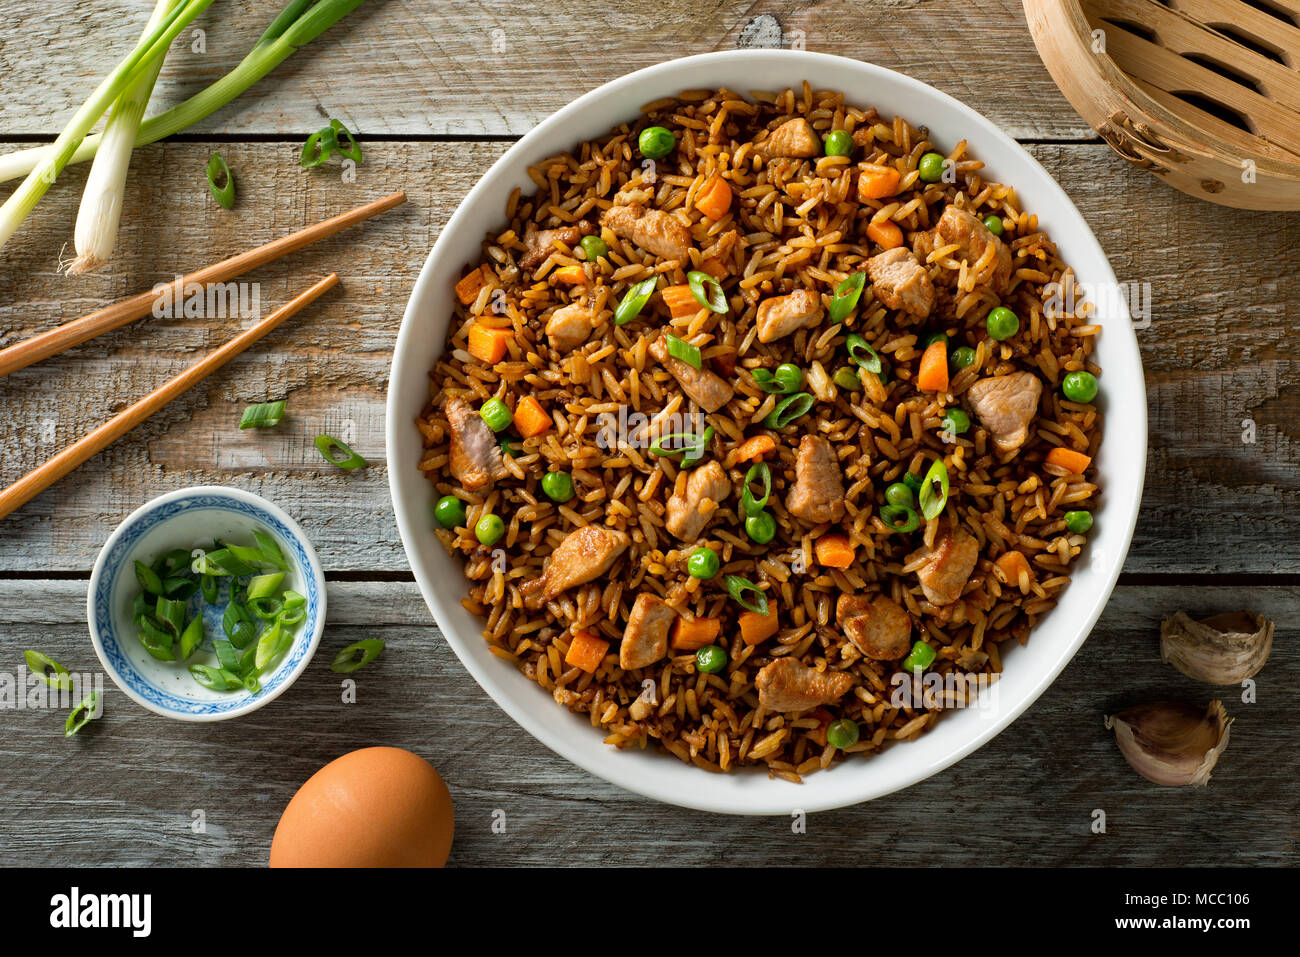 Delicious pork fried rice with egg, carrot, green peas, garlic and green onion. Stock Photo